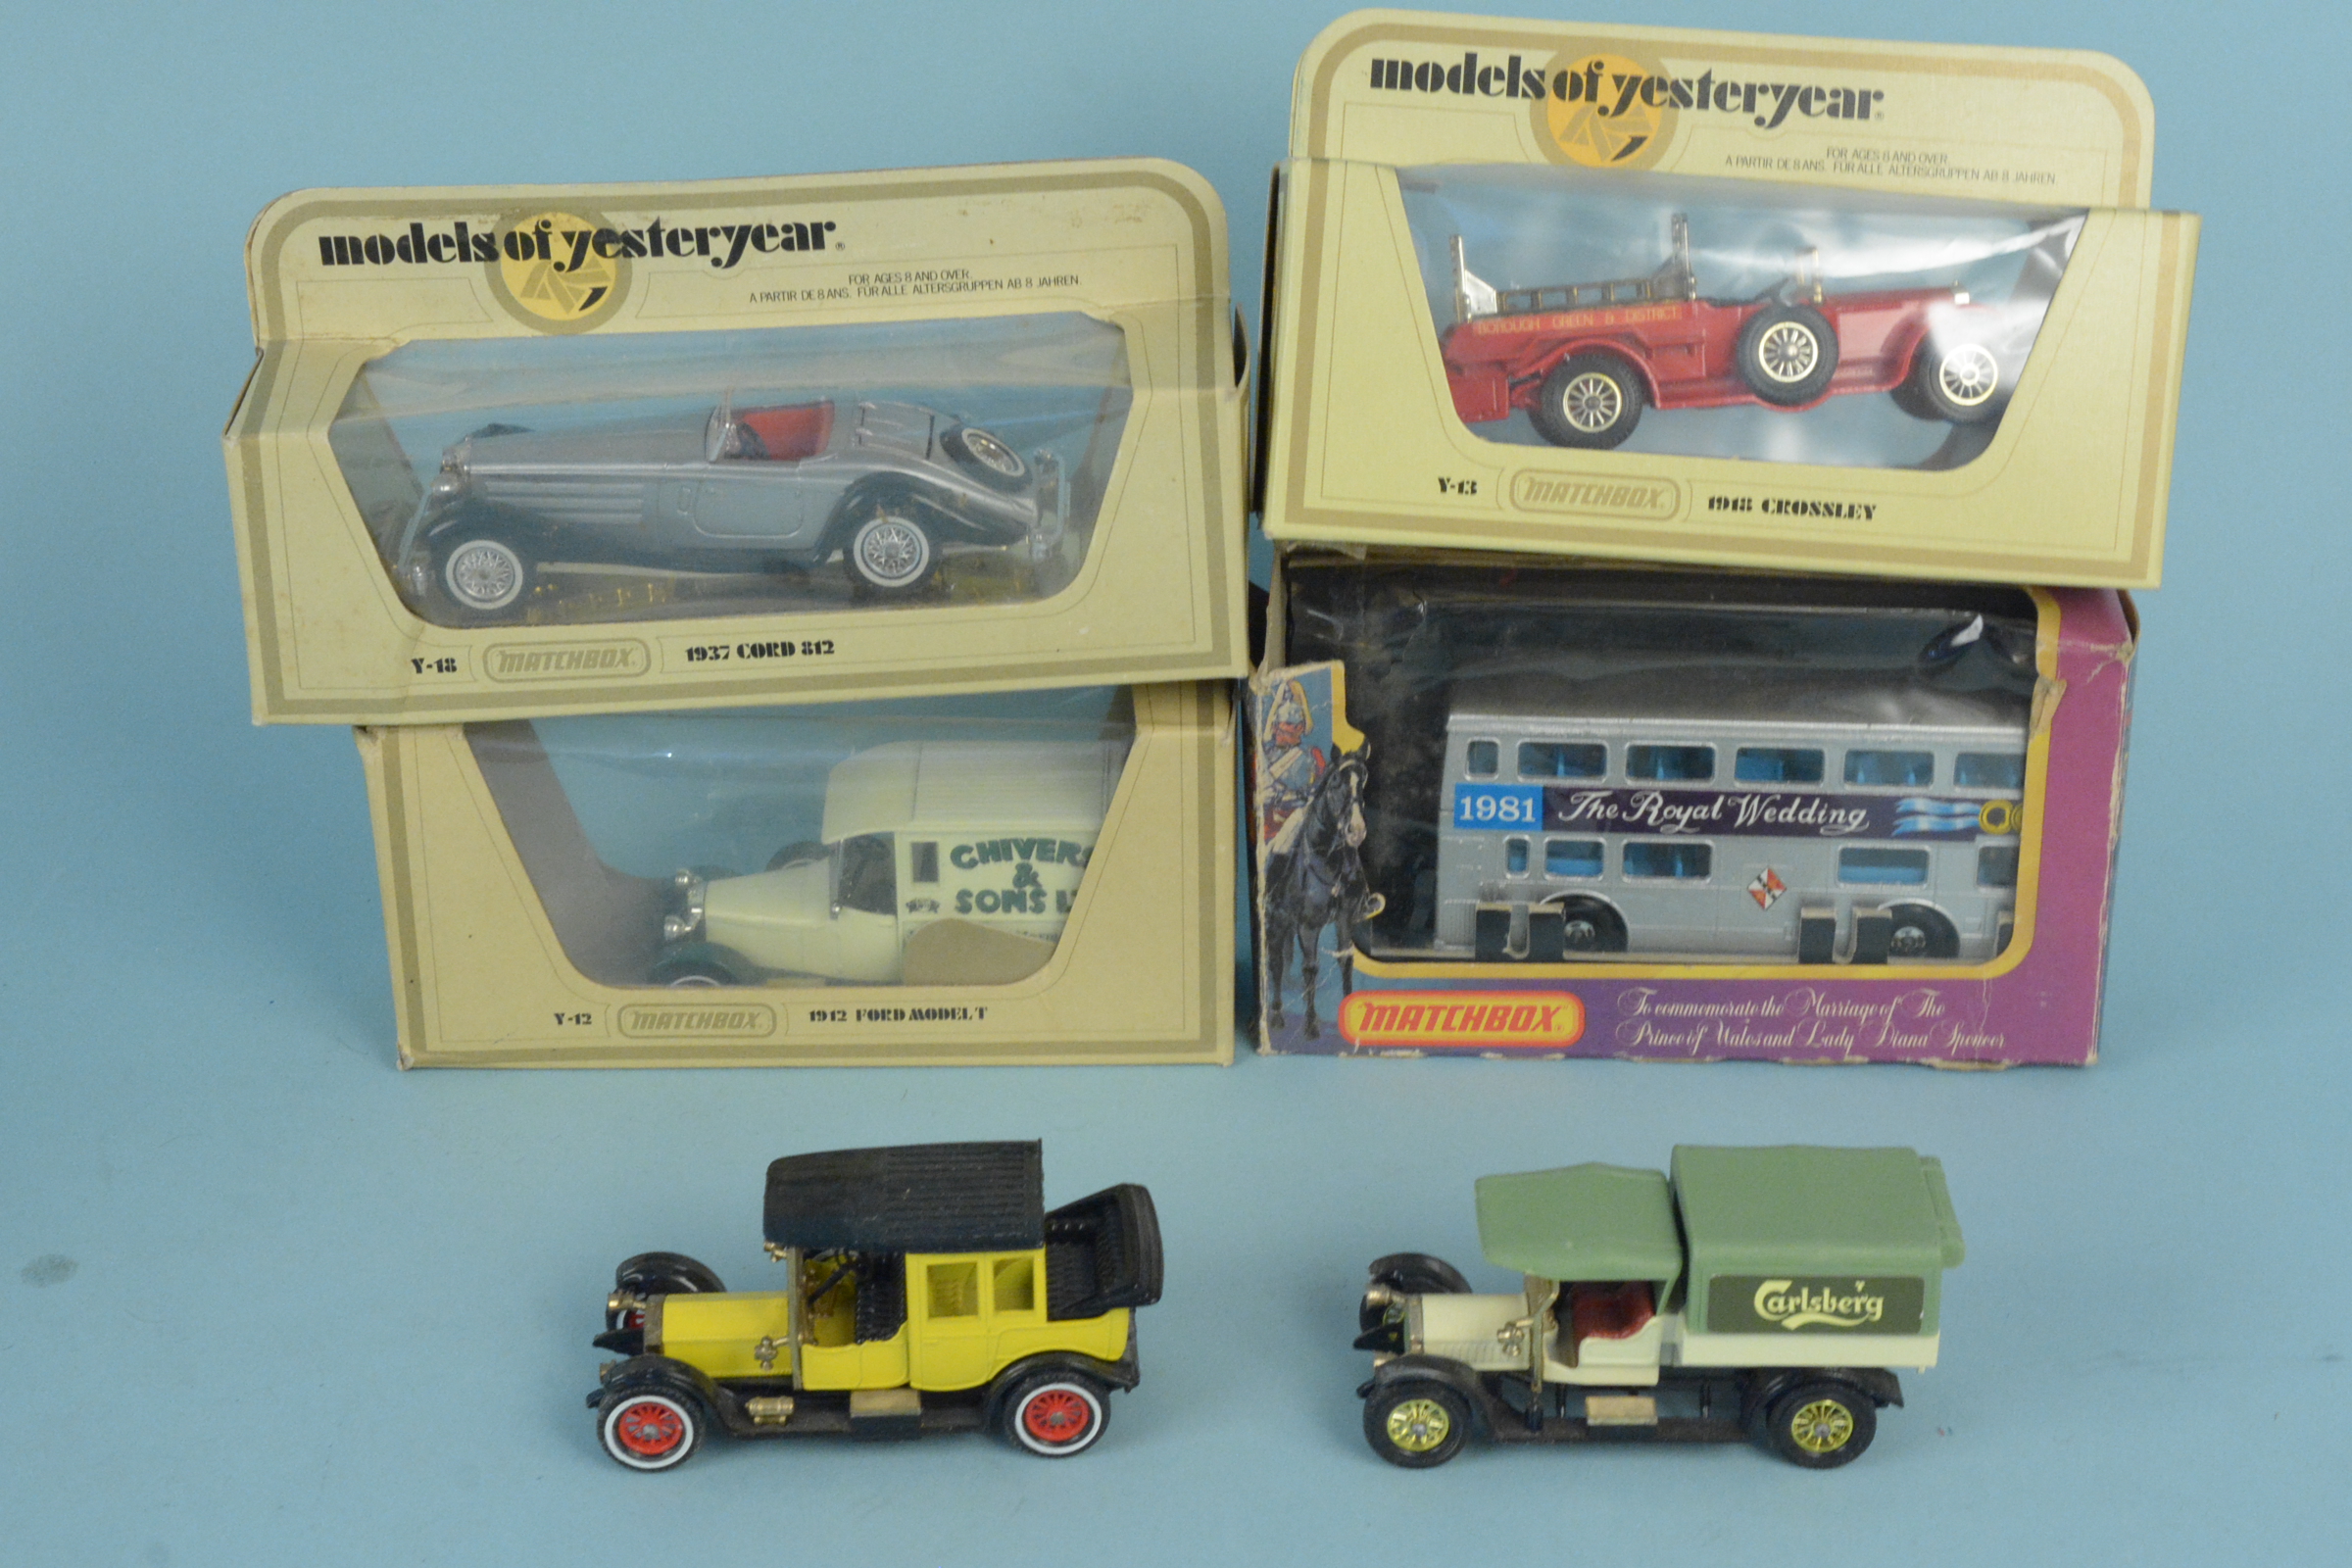 A box of Matchbox Models of Yesteryear including 1981 Royal Wedding bus - Image 2 of 3